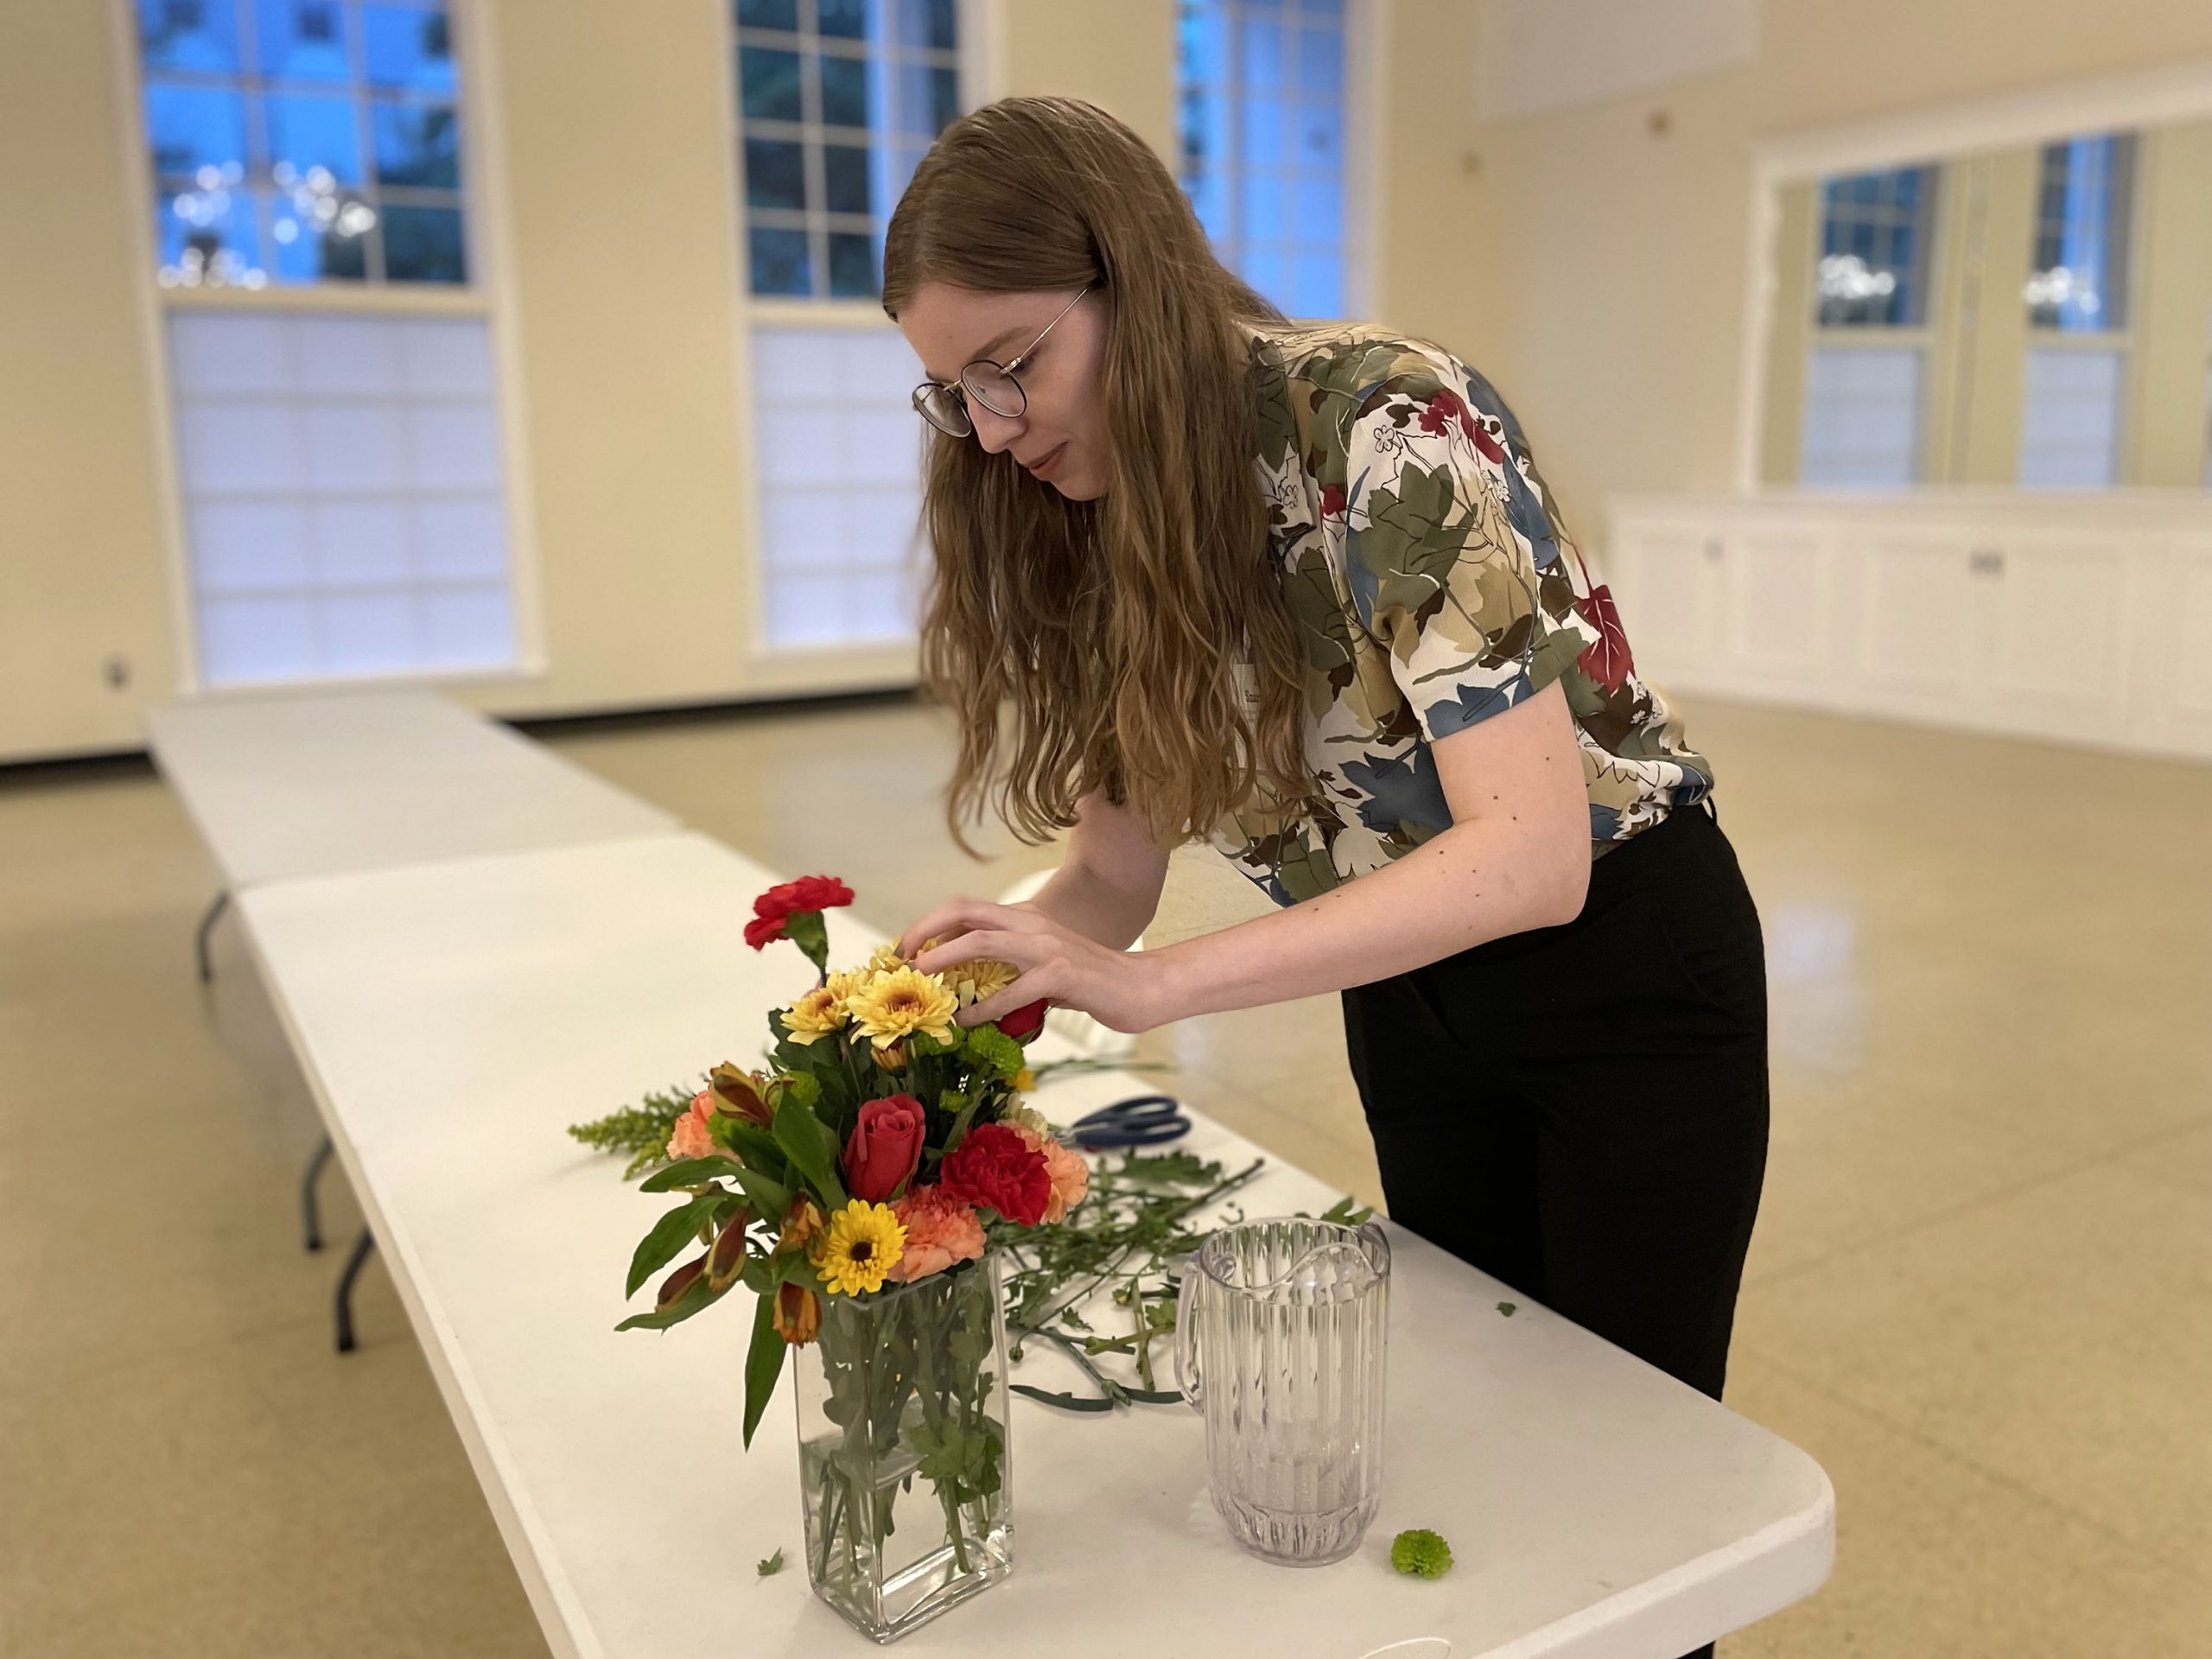 A guest places flowers in a vase